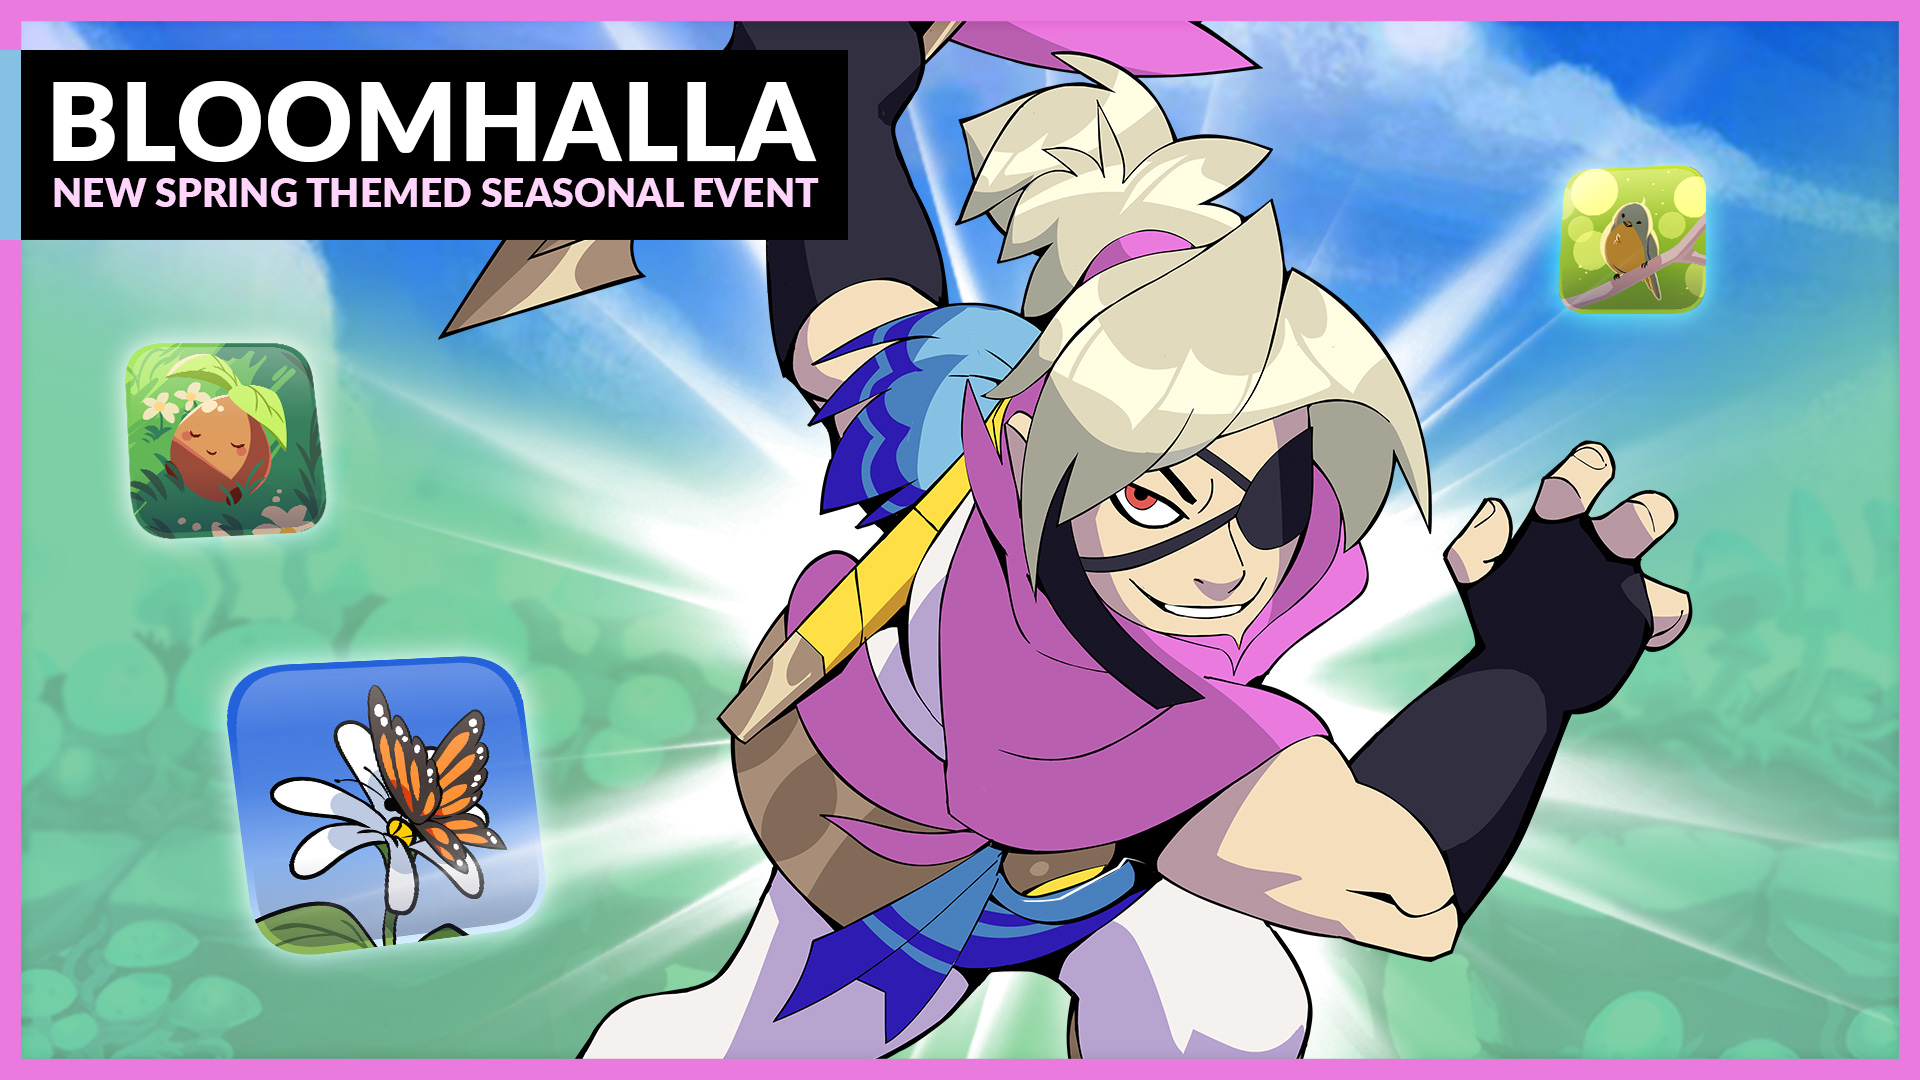 Welcome to Bloomhalla!